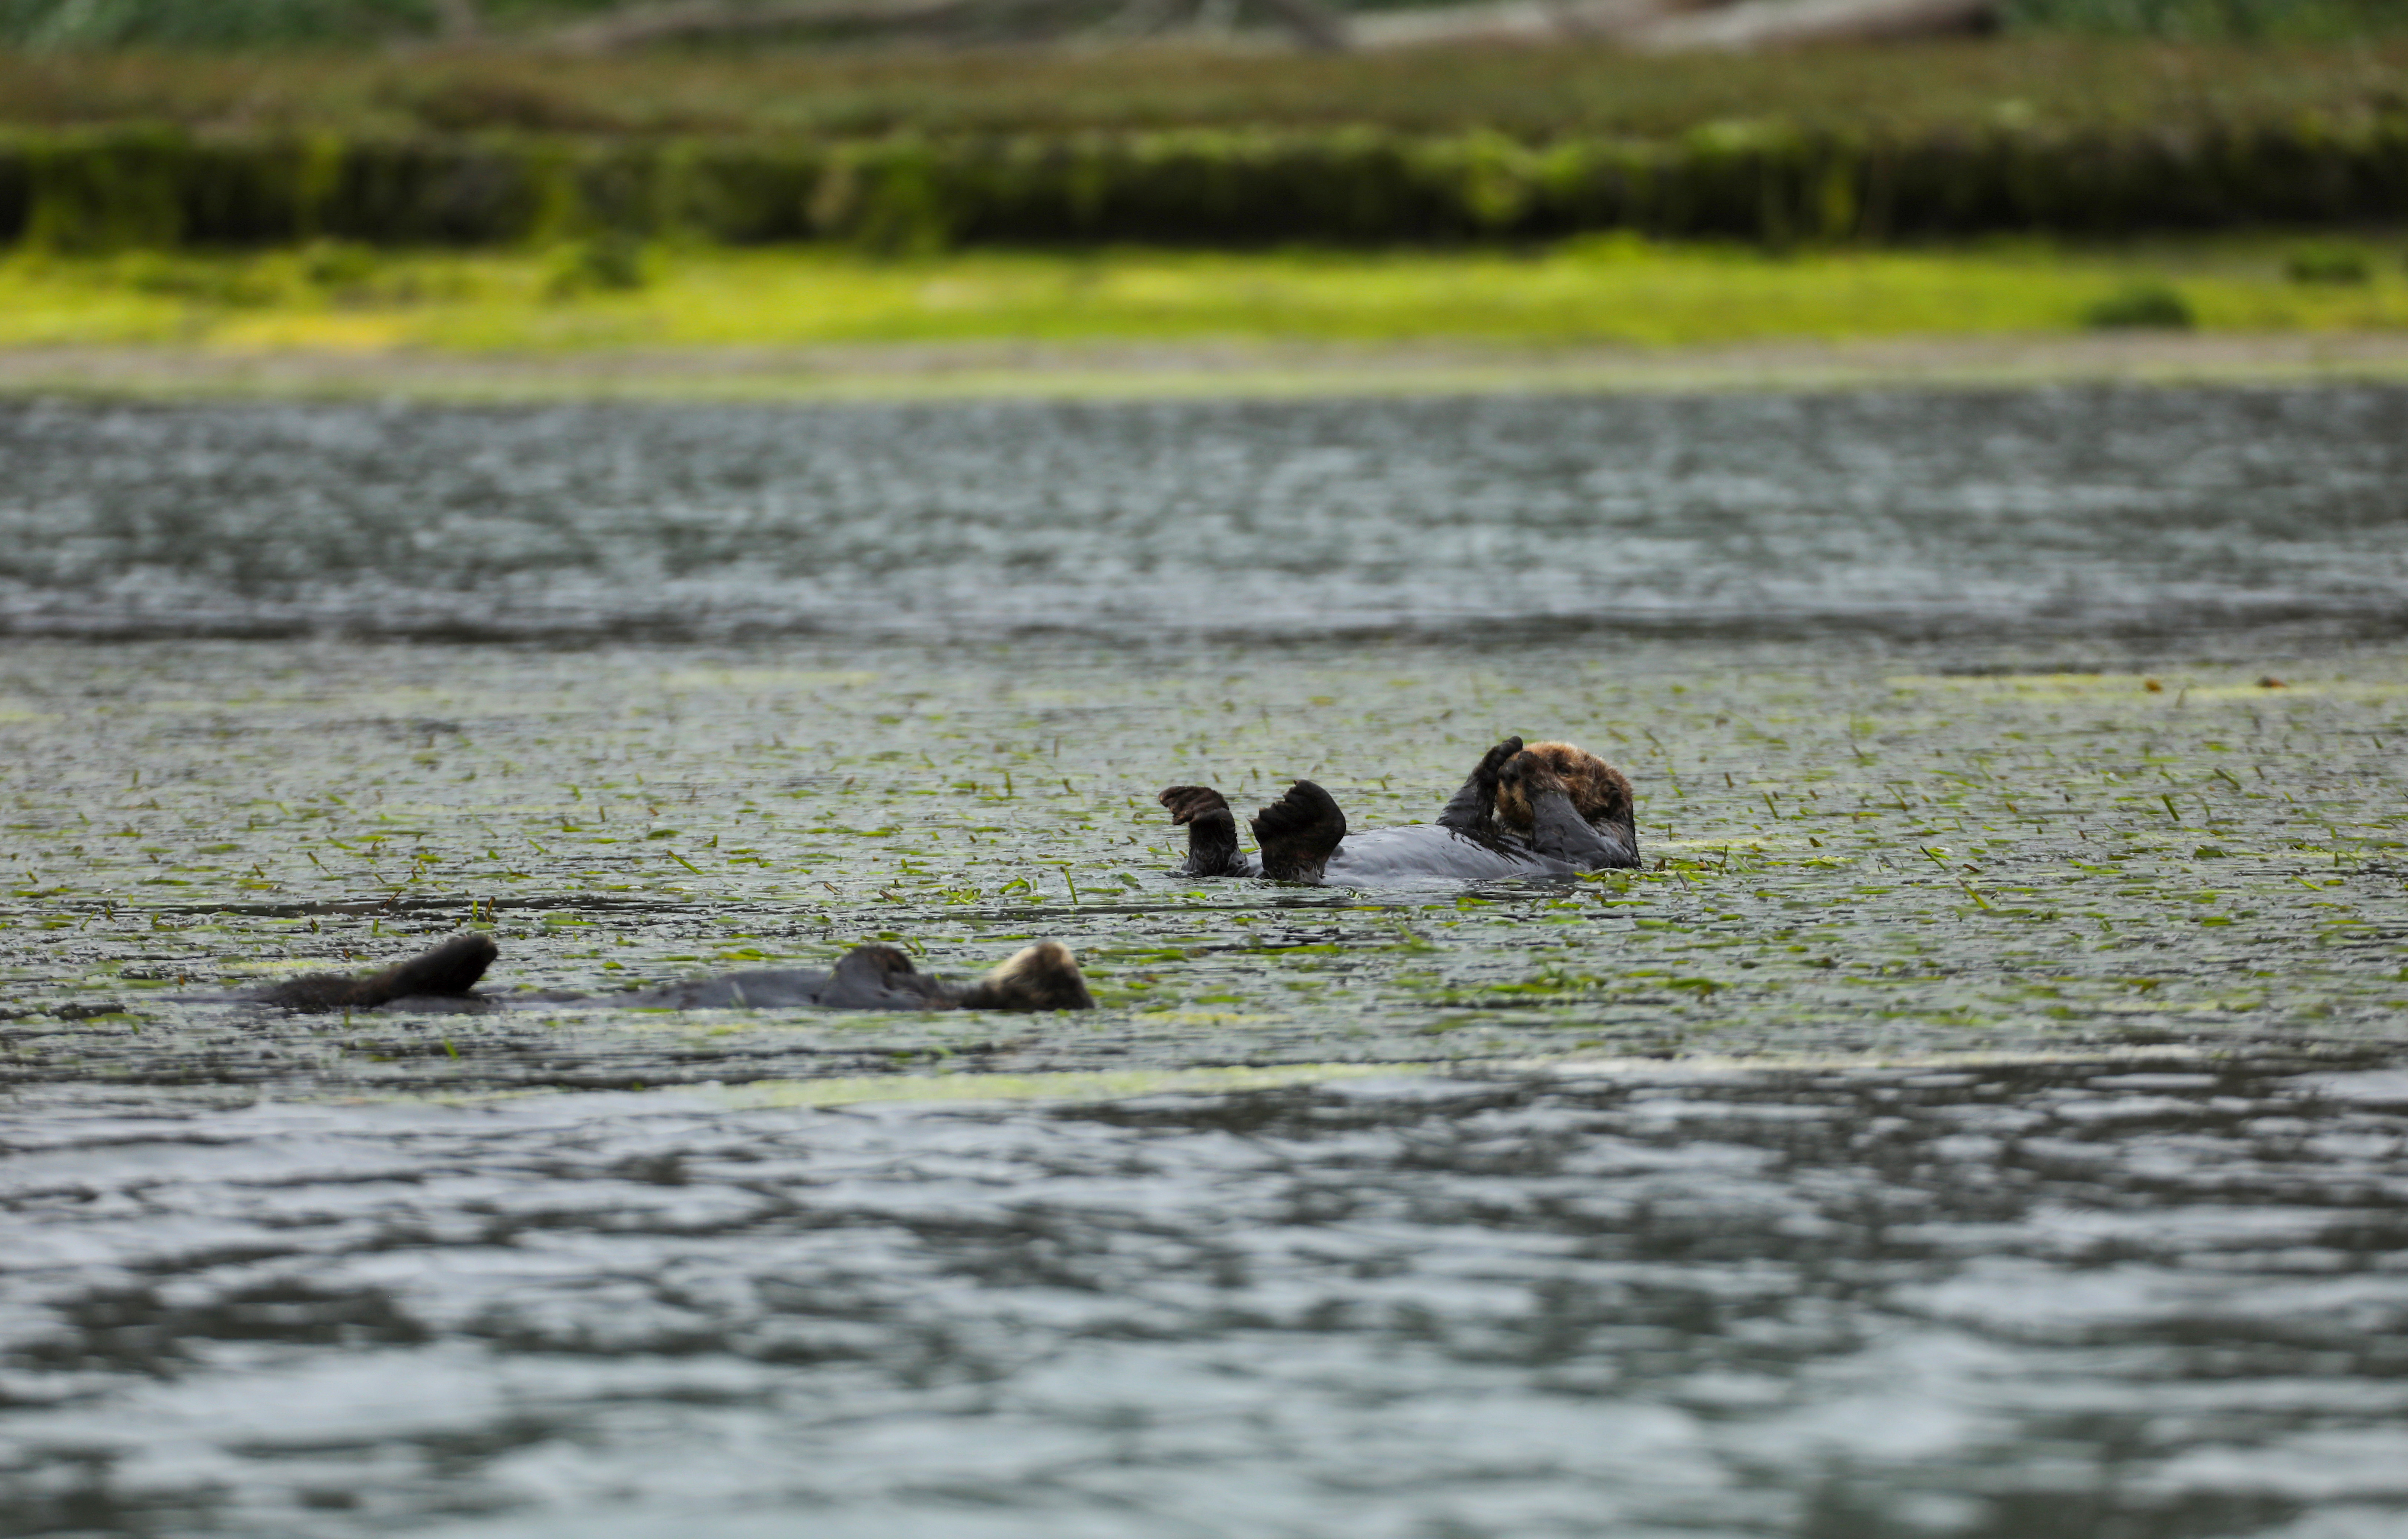 Sea otters bring balance to ecosystems battling climate change